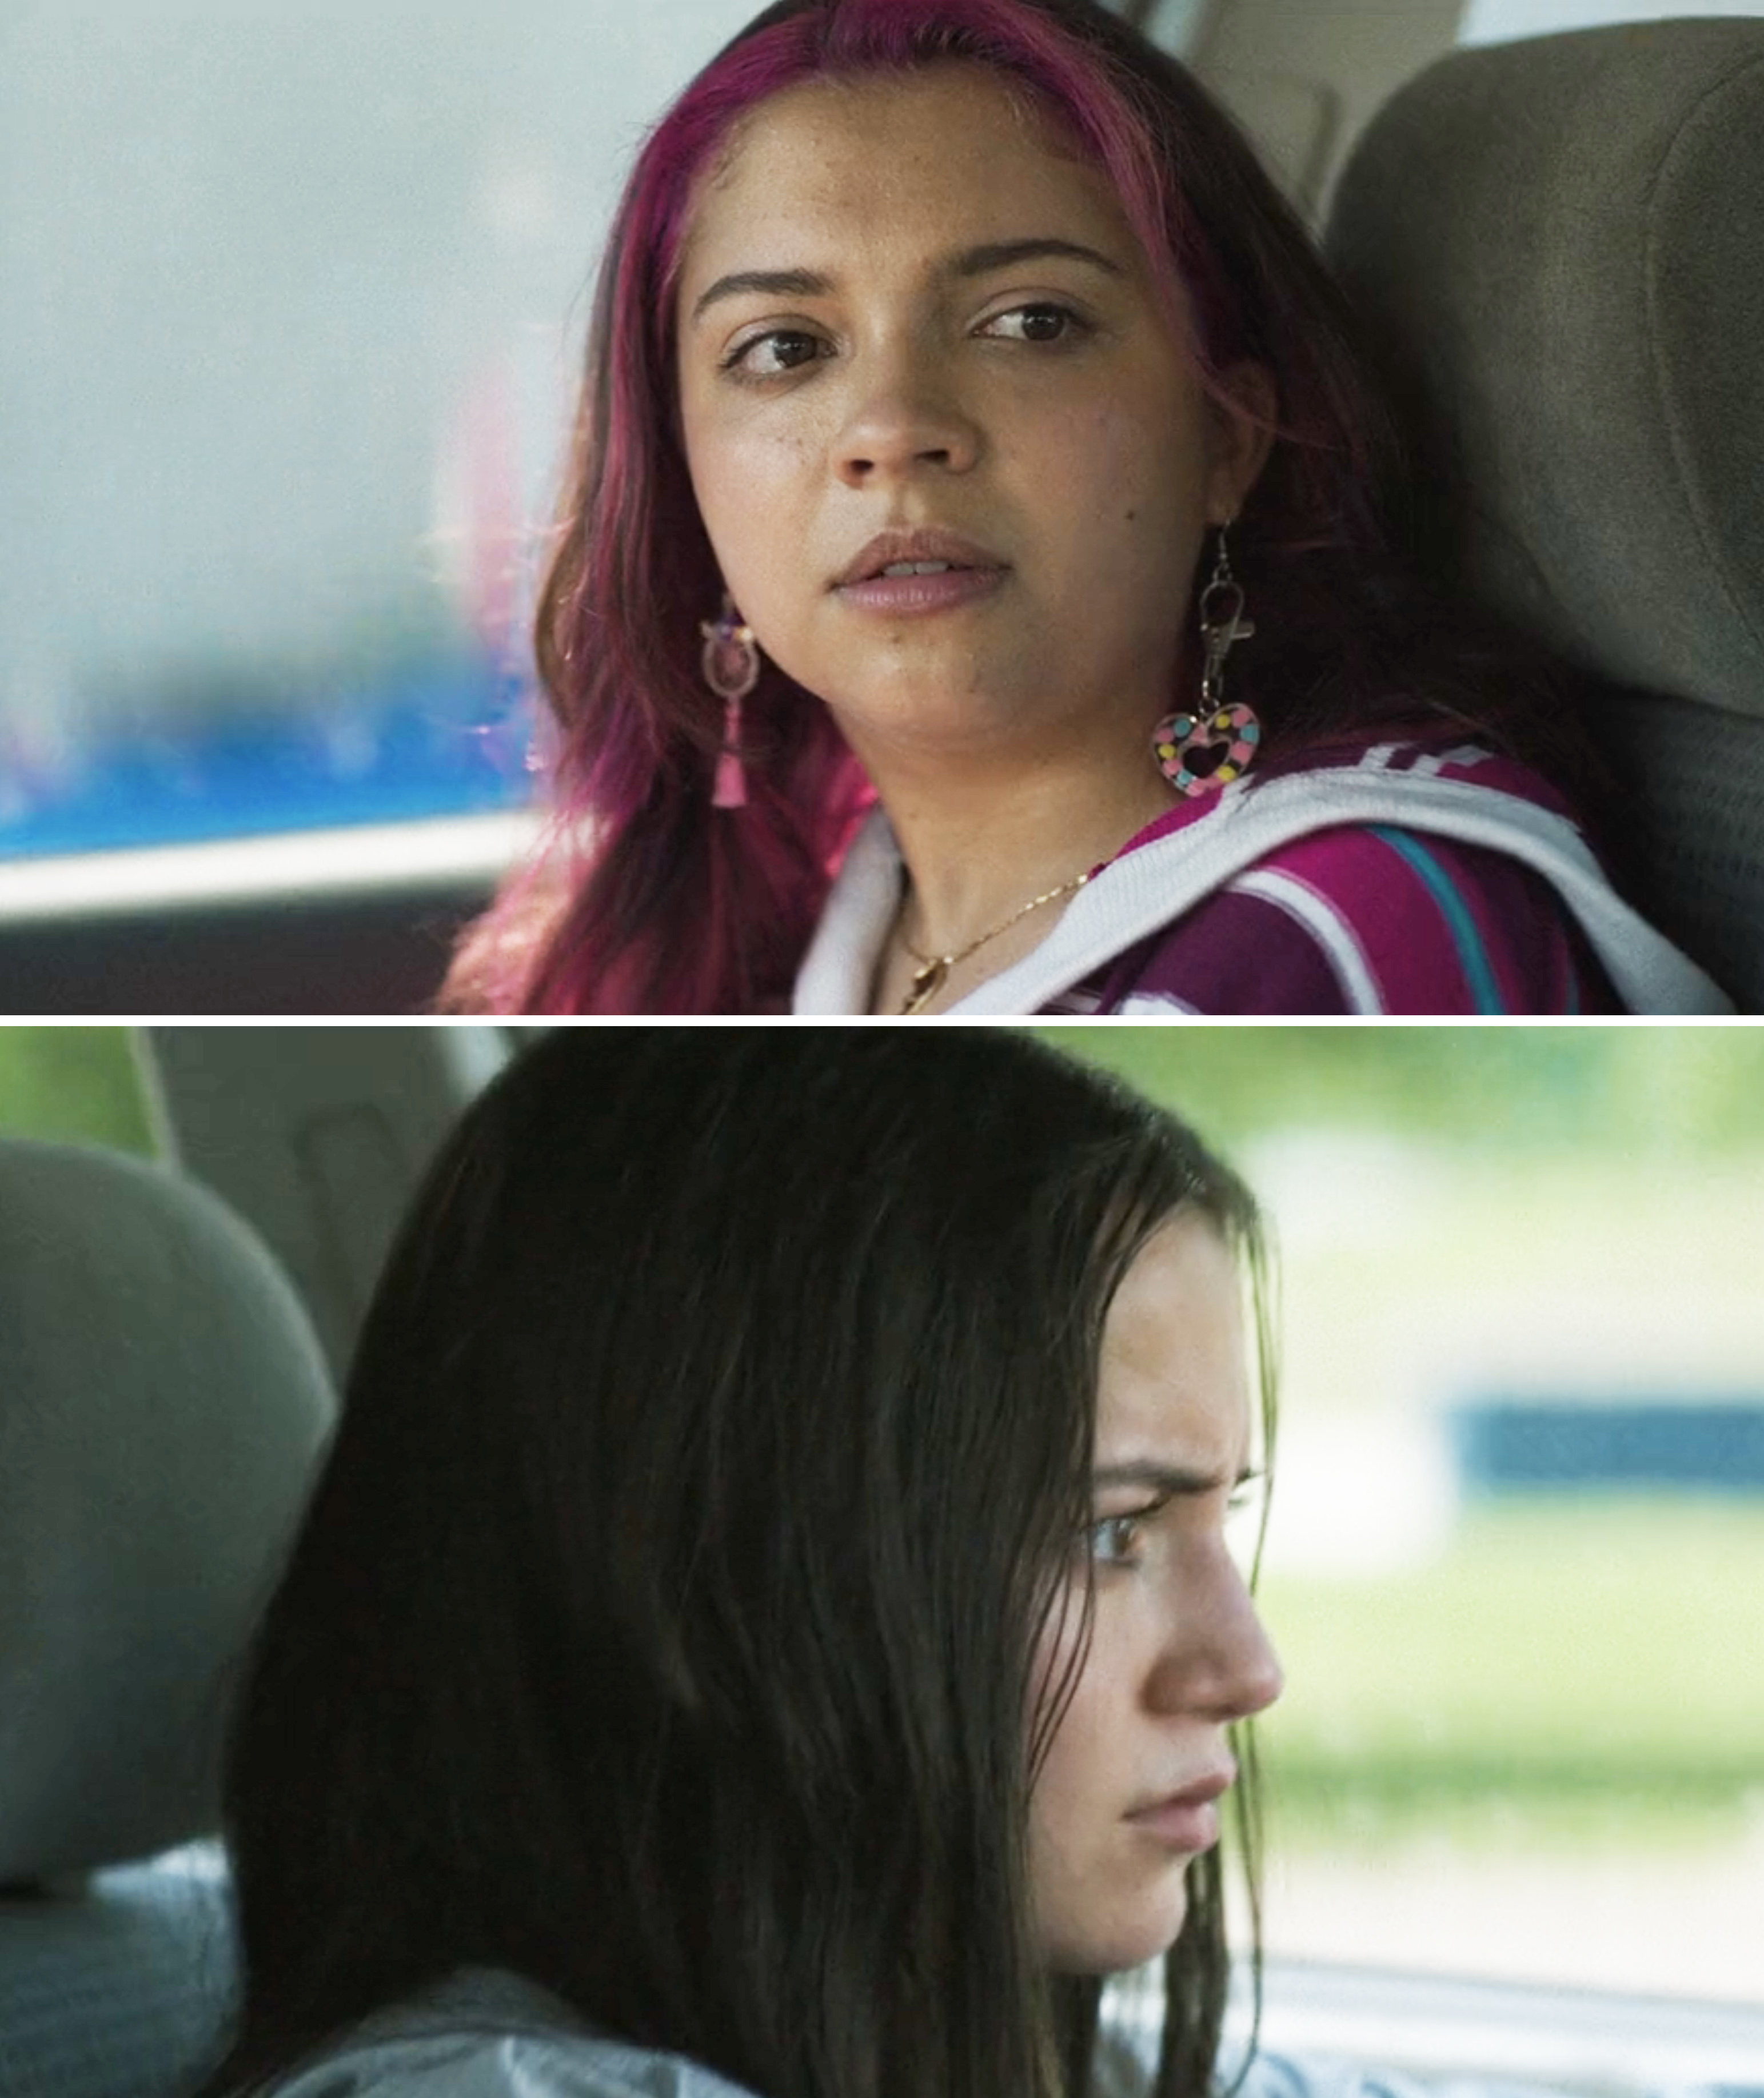 Split-screen of two characters looking pensive in a car from a TV show or movie